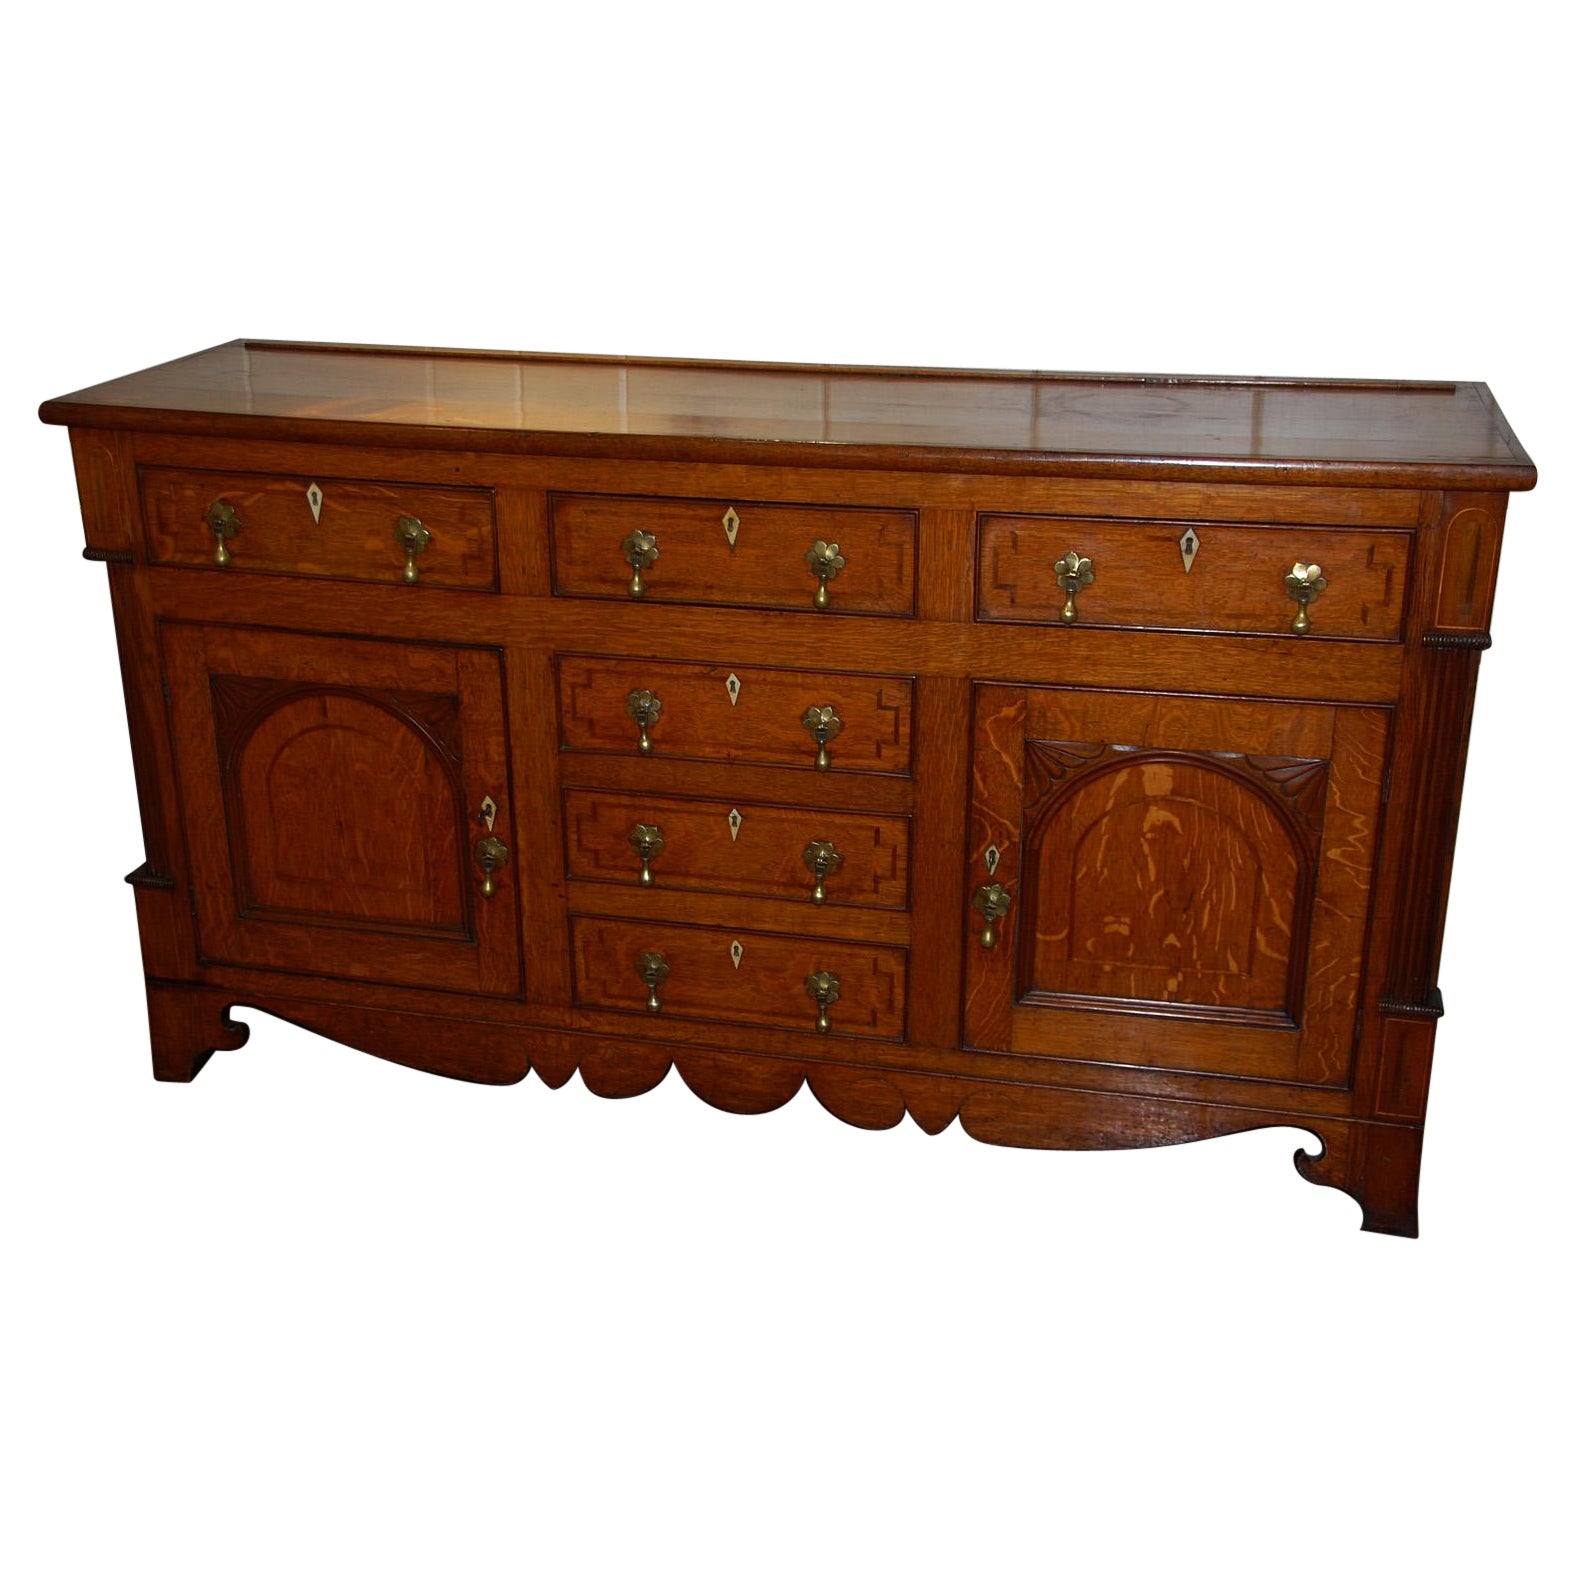 Welsh William IV Oak and Walnut Low Dresser with Drawers and Cupboards